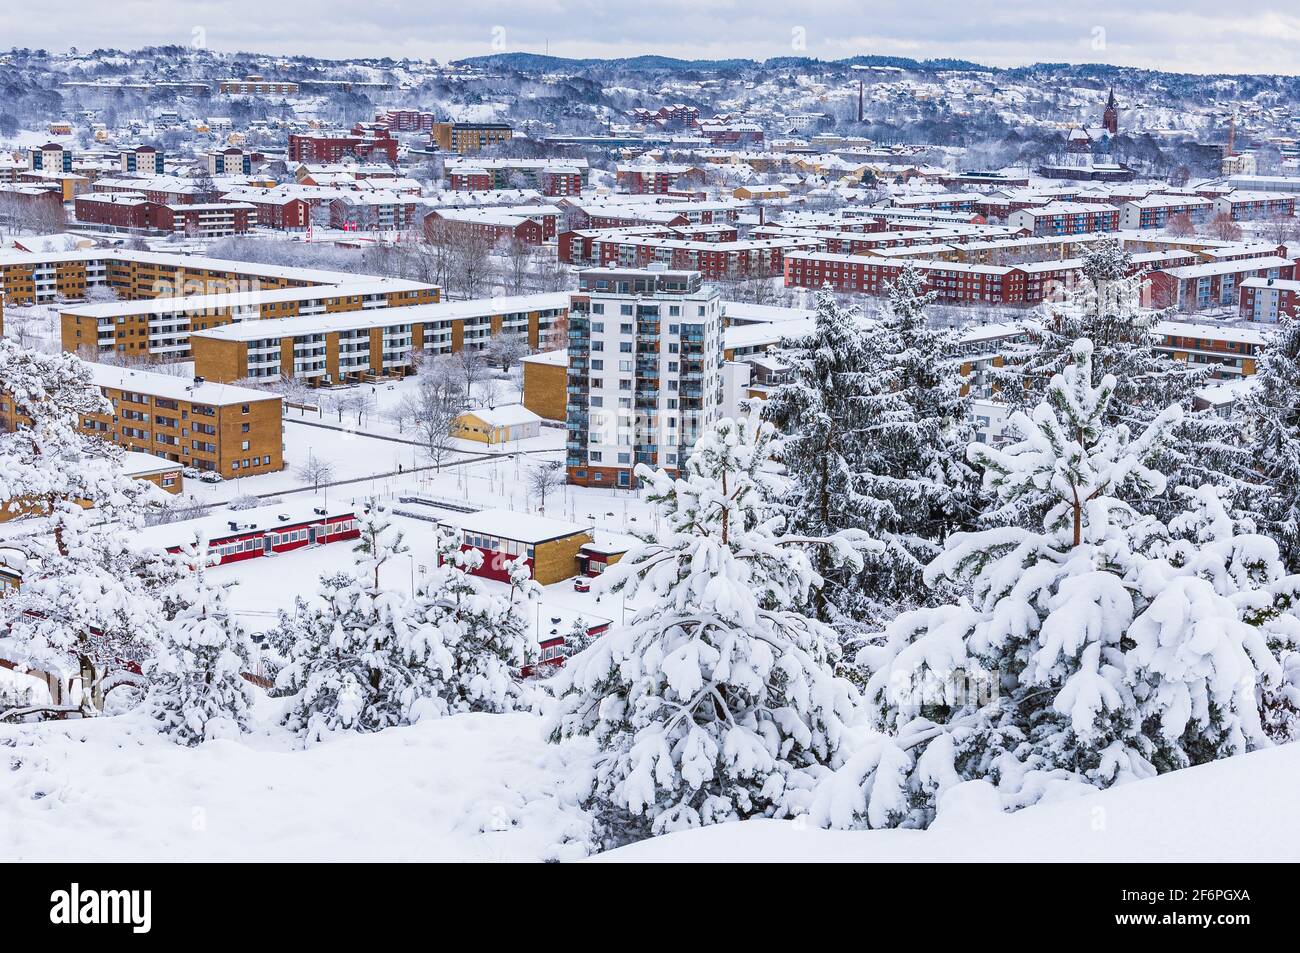 Snow covered residential area in a Swedish town Stock Photo